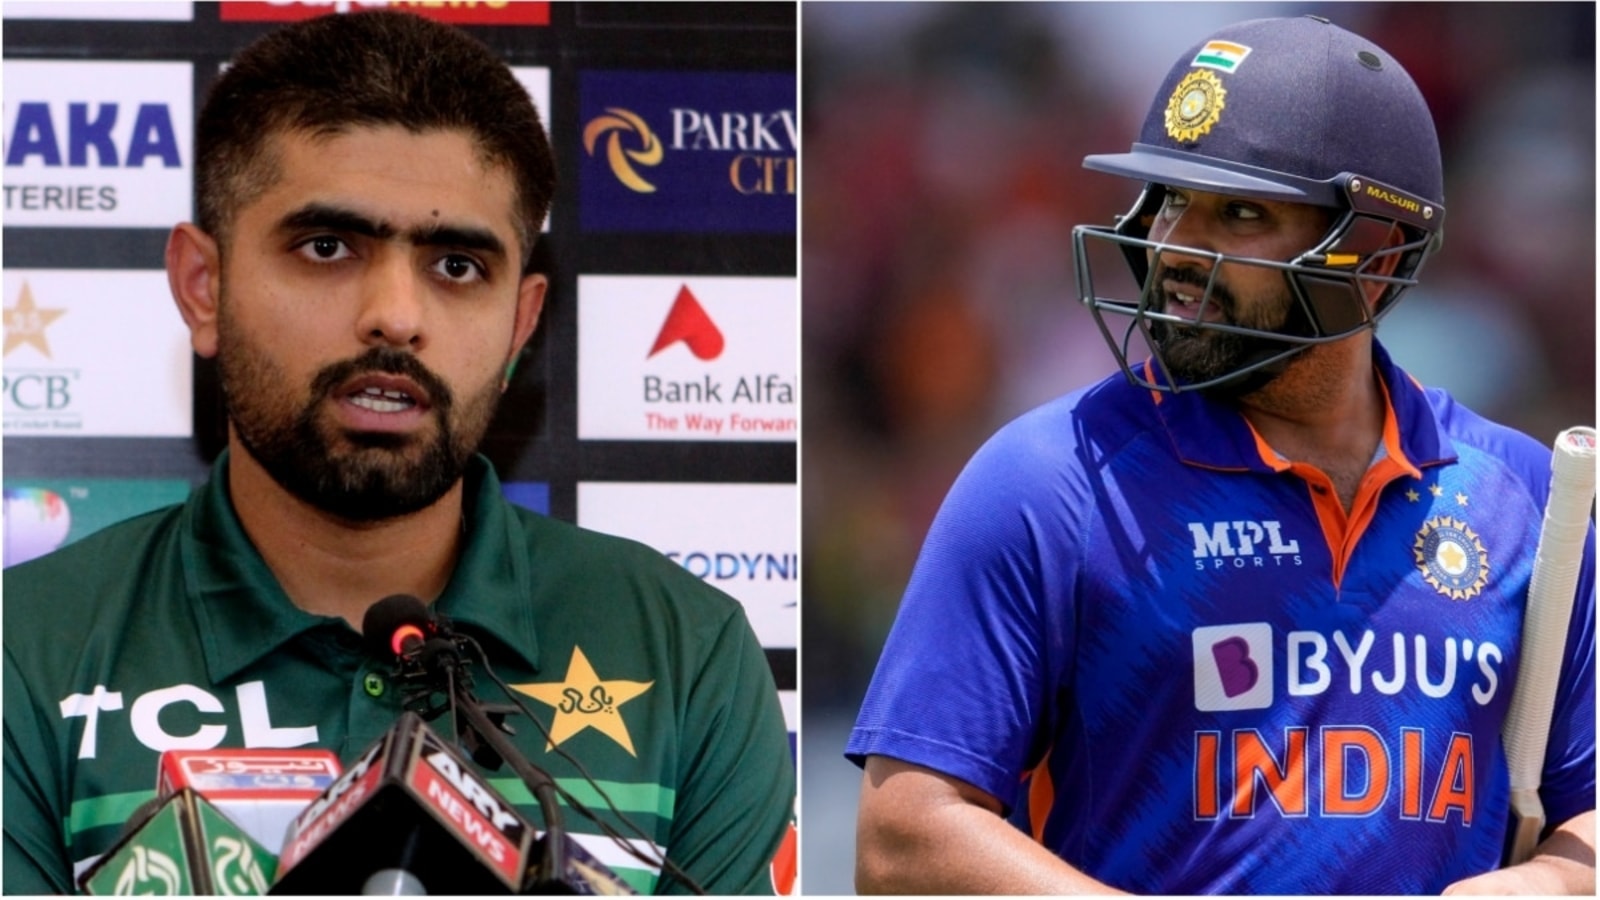 india-vs-pakistan-t20-asia-cup-2022-live-streaming-when-and-where-to-watch-ind-vs-pak-live-match-online-and-on-tv